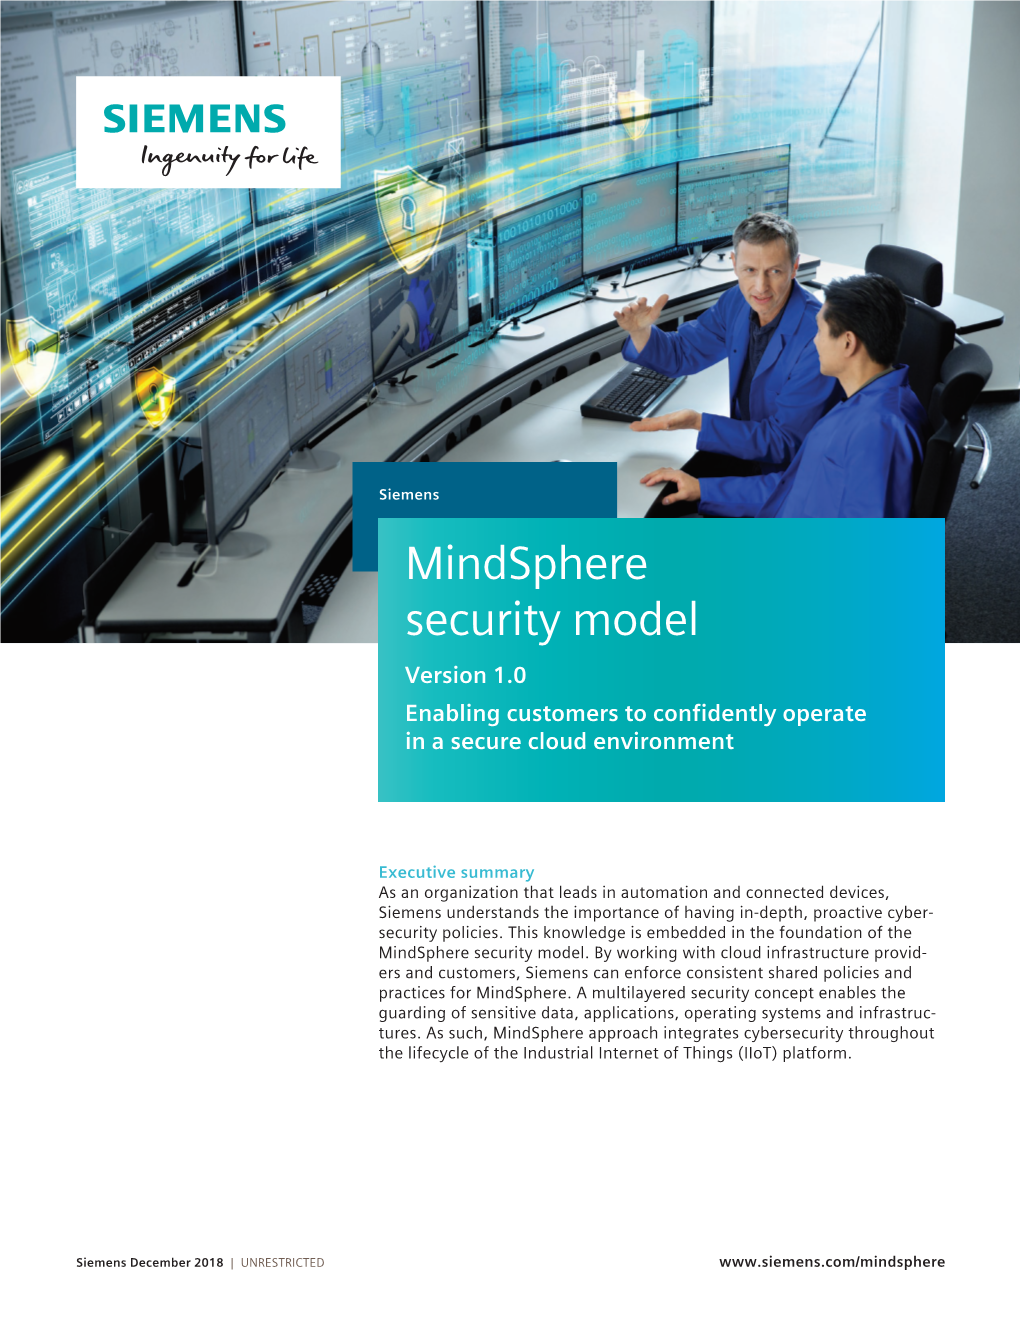 Mindsphere Security Model Version 1.0 Enabling Customers to Confidently Operate in a Secure Cloud Environment